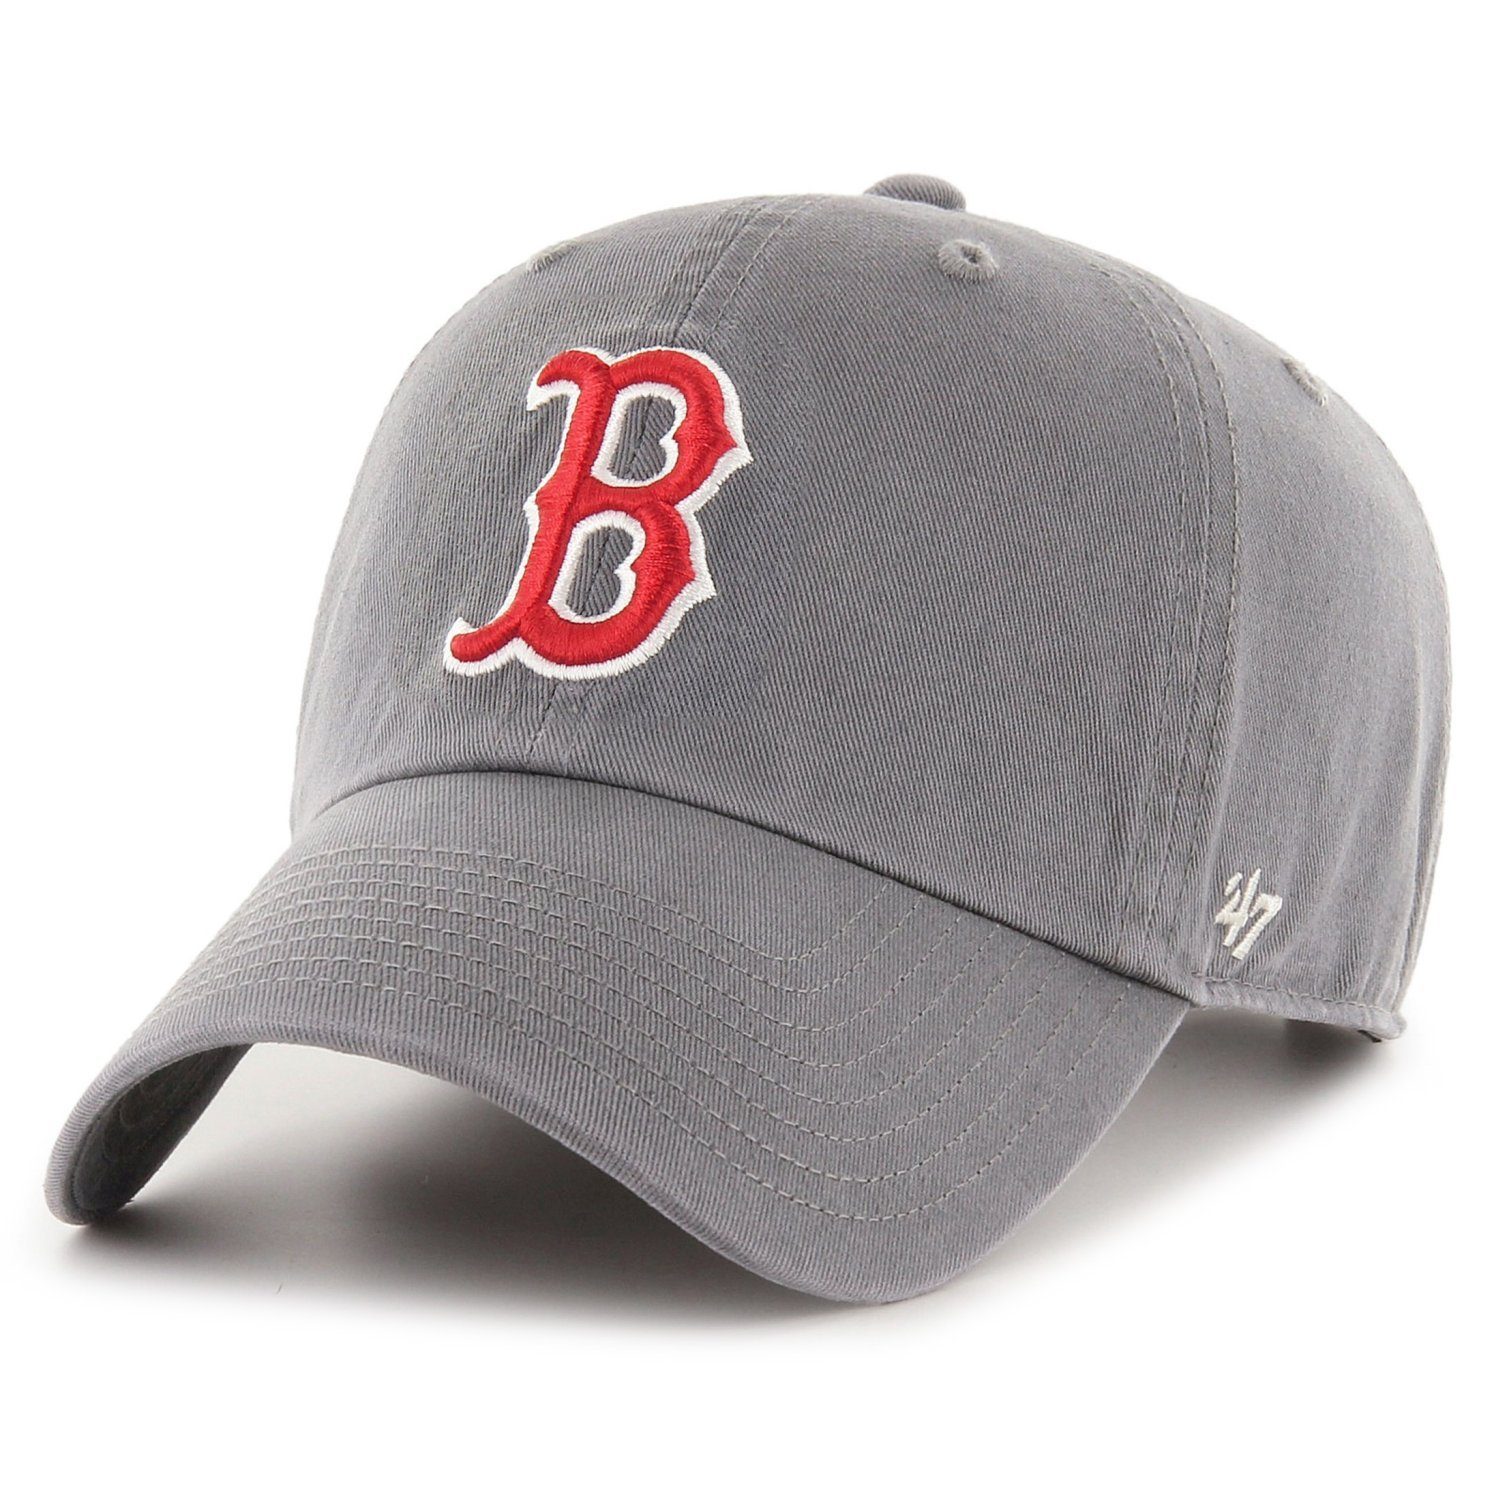 Boston UP MLB CLEAN Red Sox Trucker Fit Relaxed Cap '47 Brand